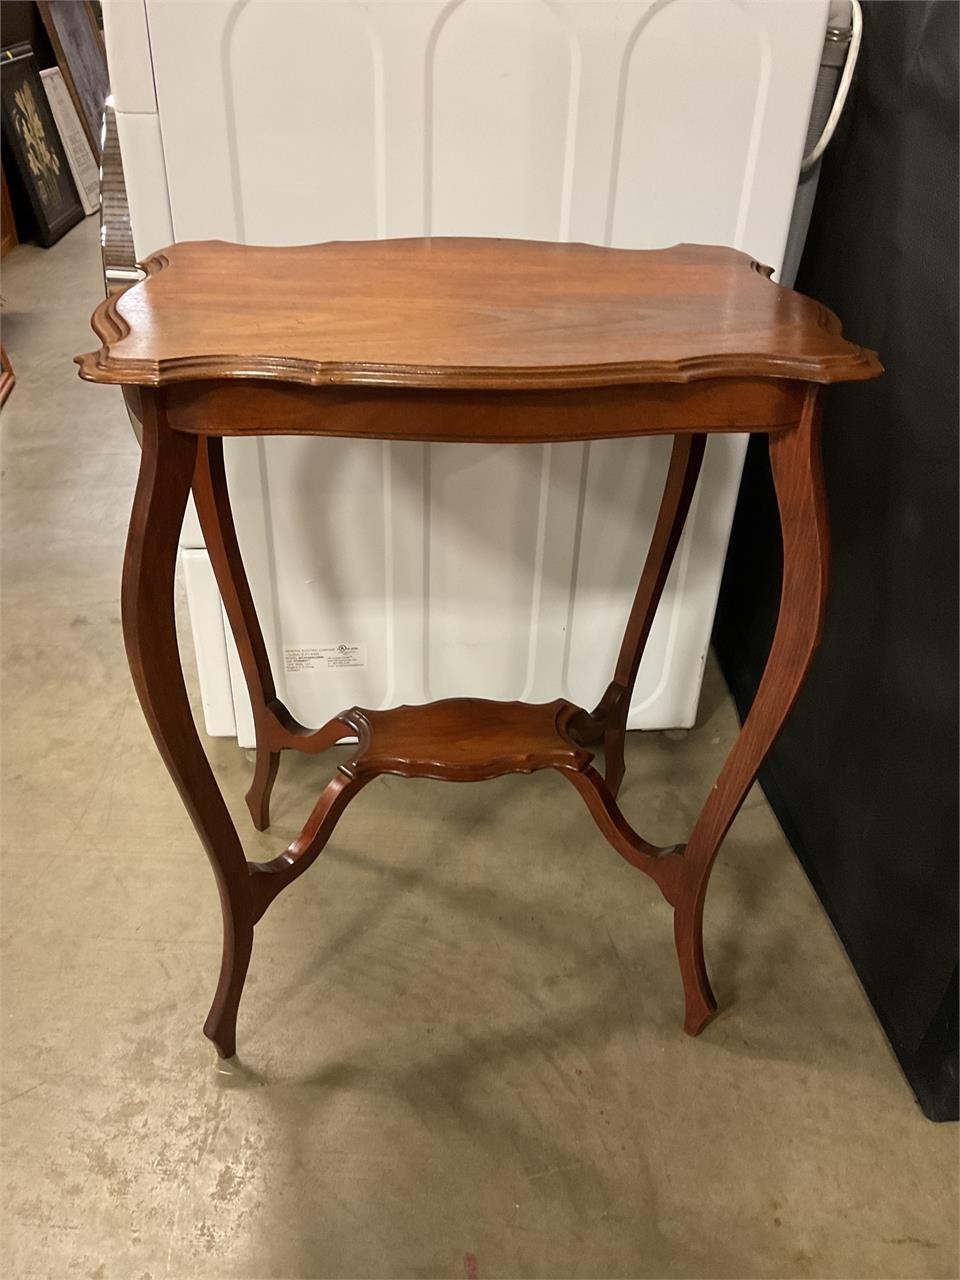 16x24 side table